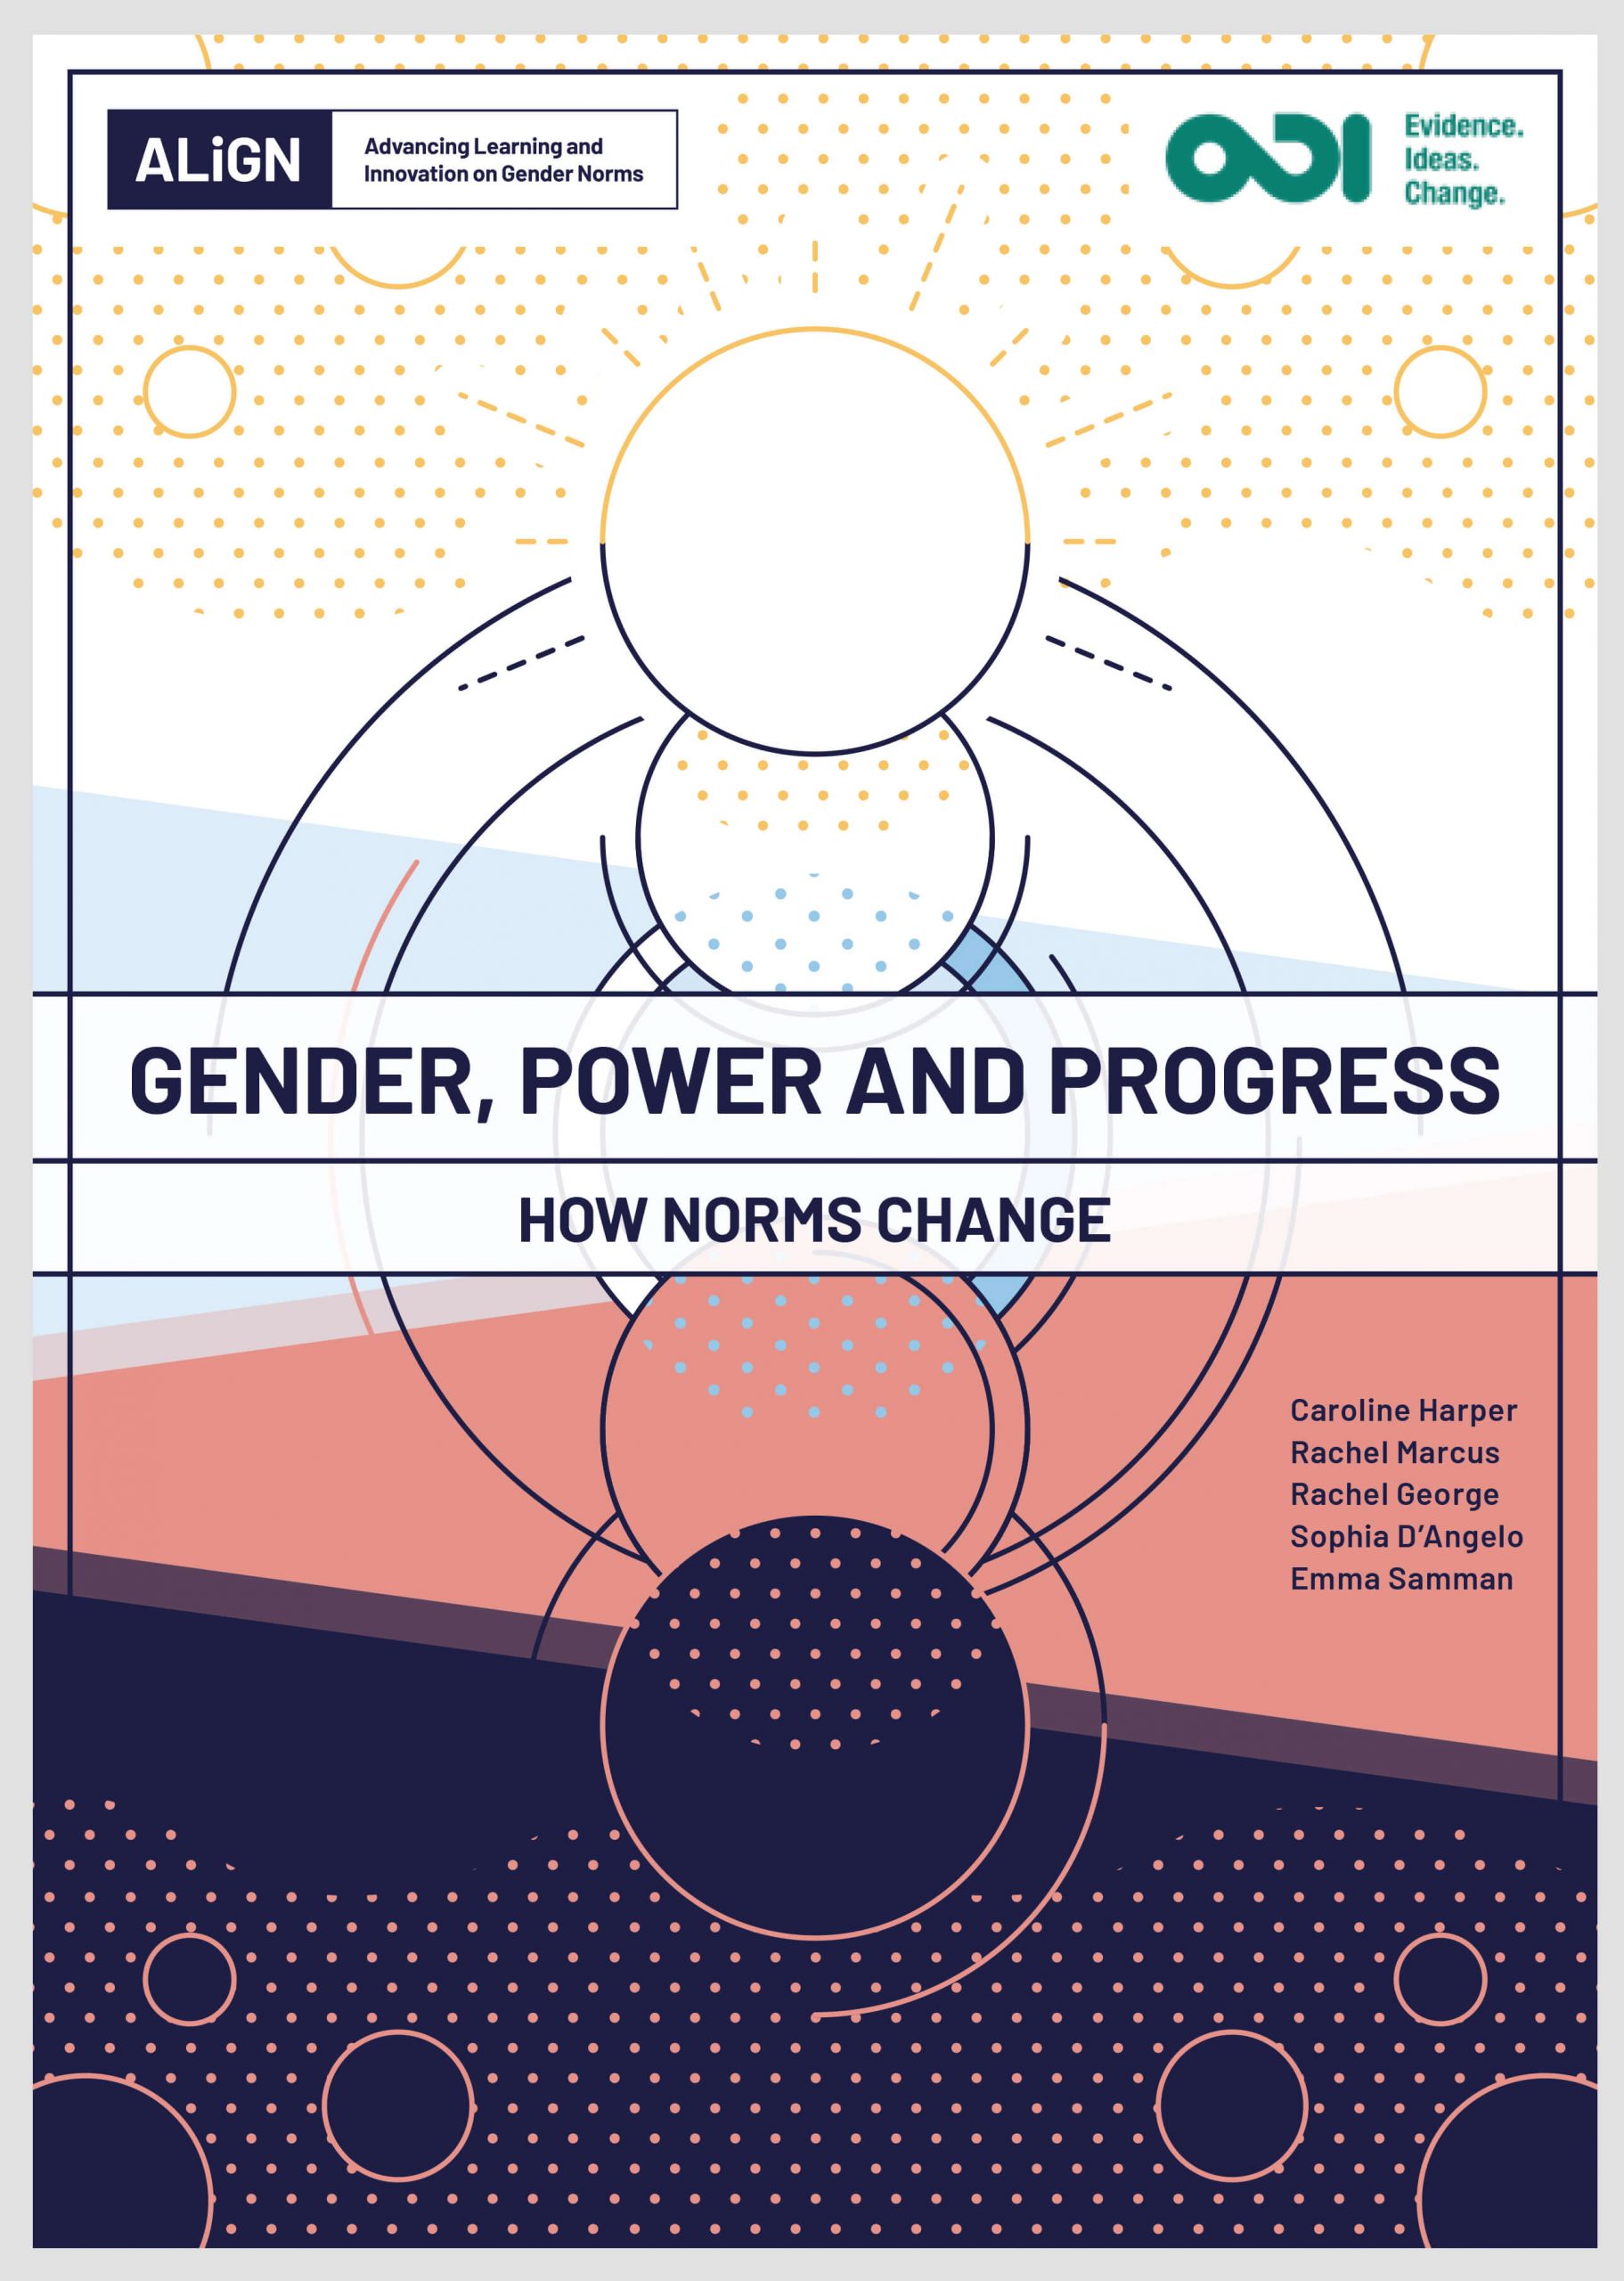 Gender, power and progress - How norms change